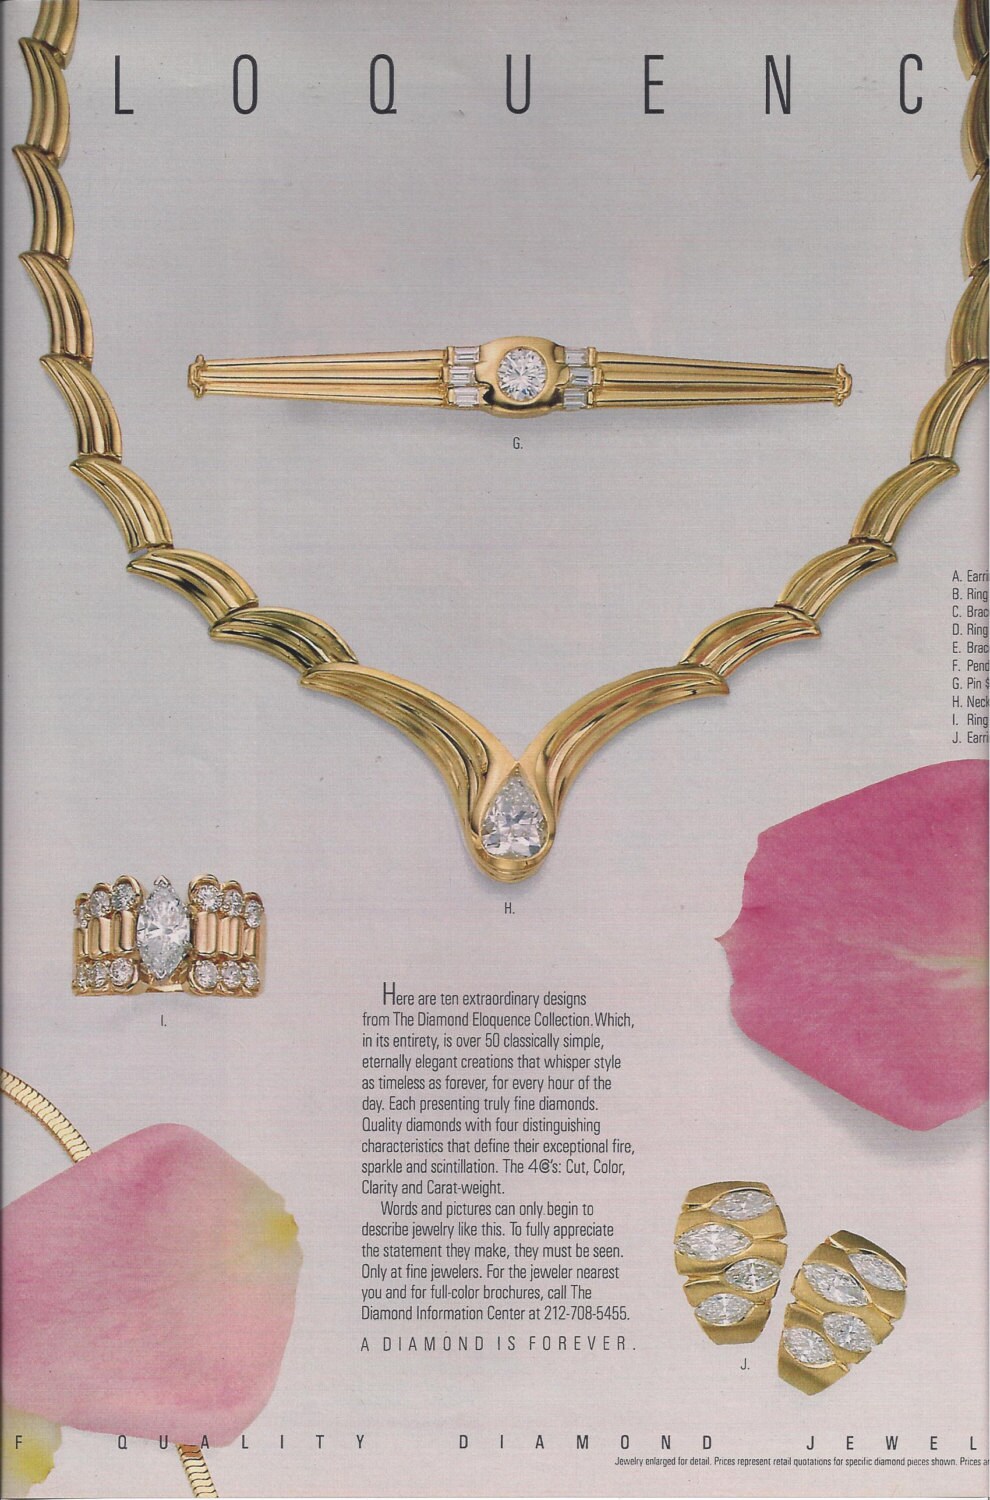 1986 Color Magazine Ad for The Diamond Eloquence Collection